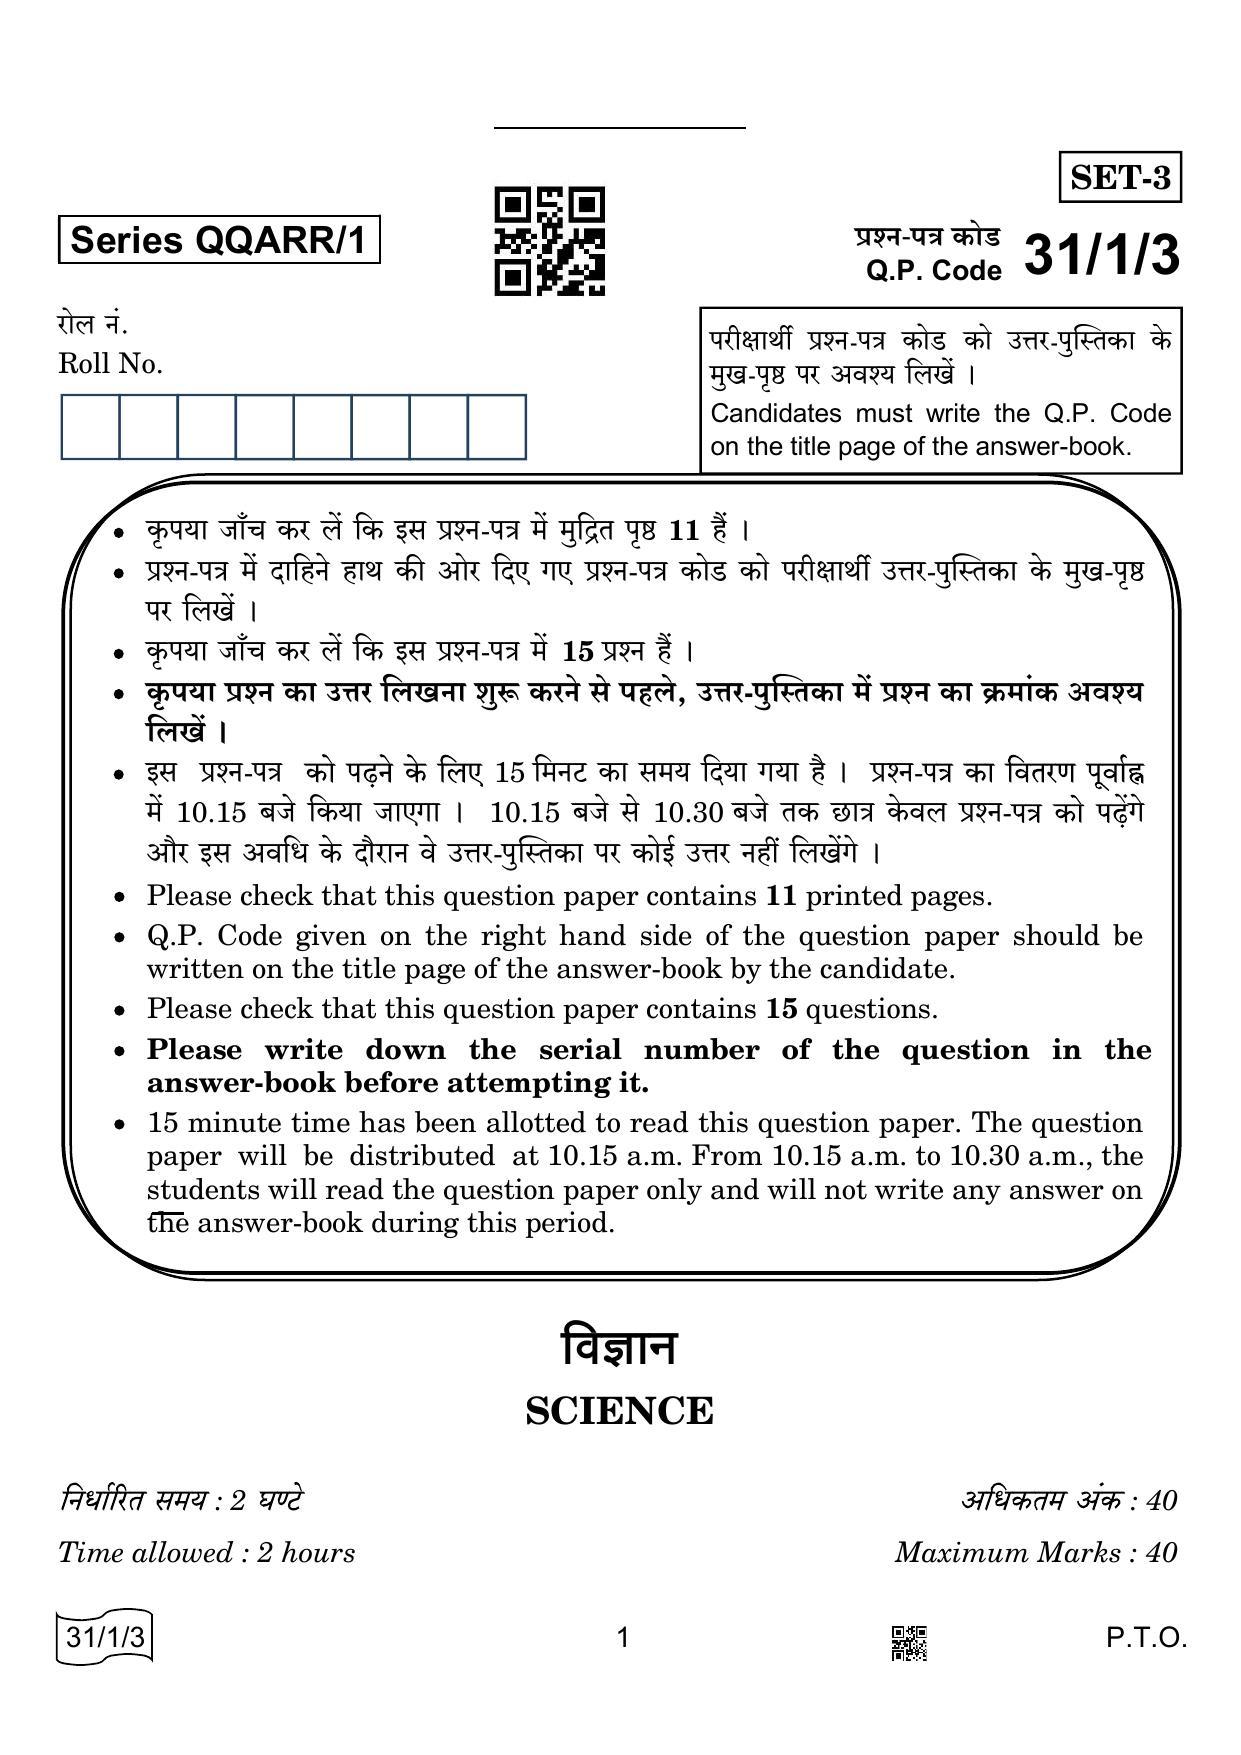 CBSE Class 10 31-1-3 Science 2022 Question Paper - Page 1